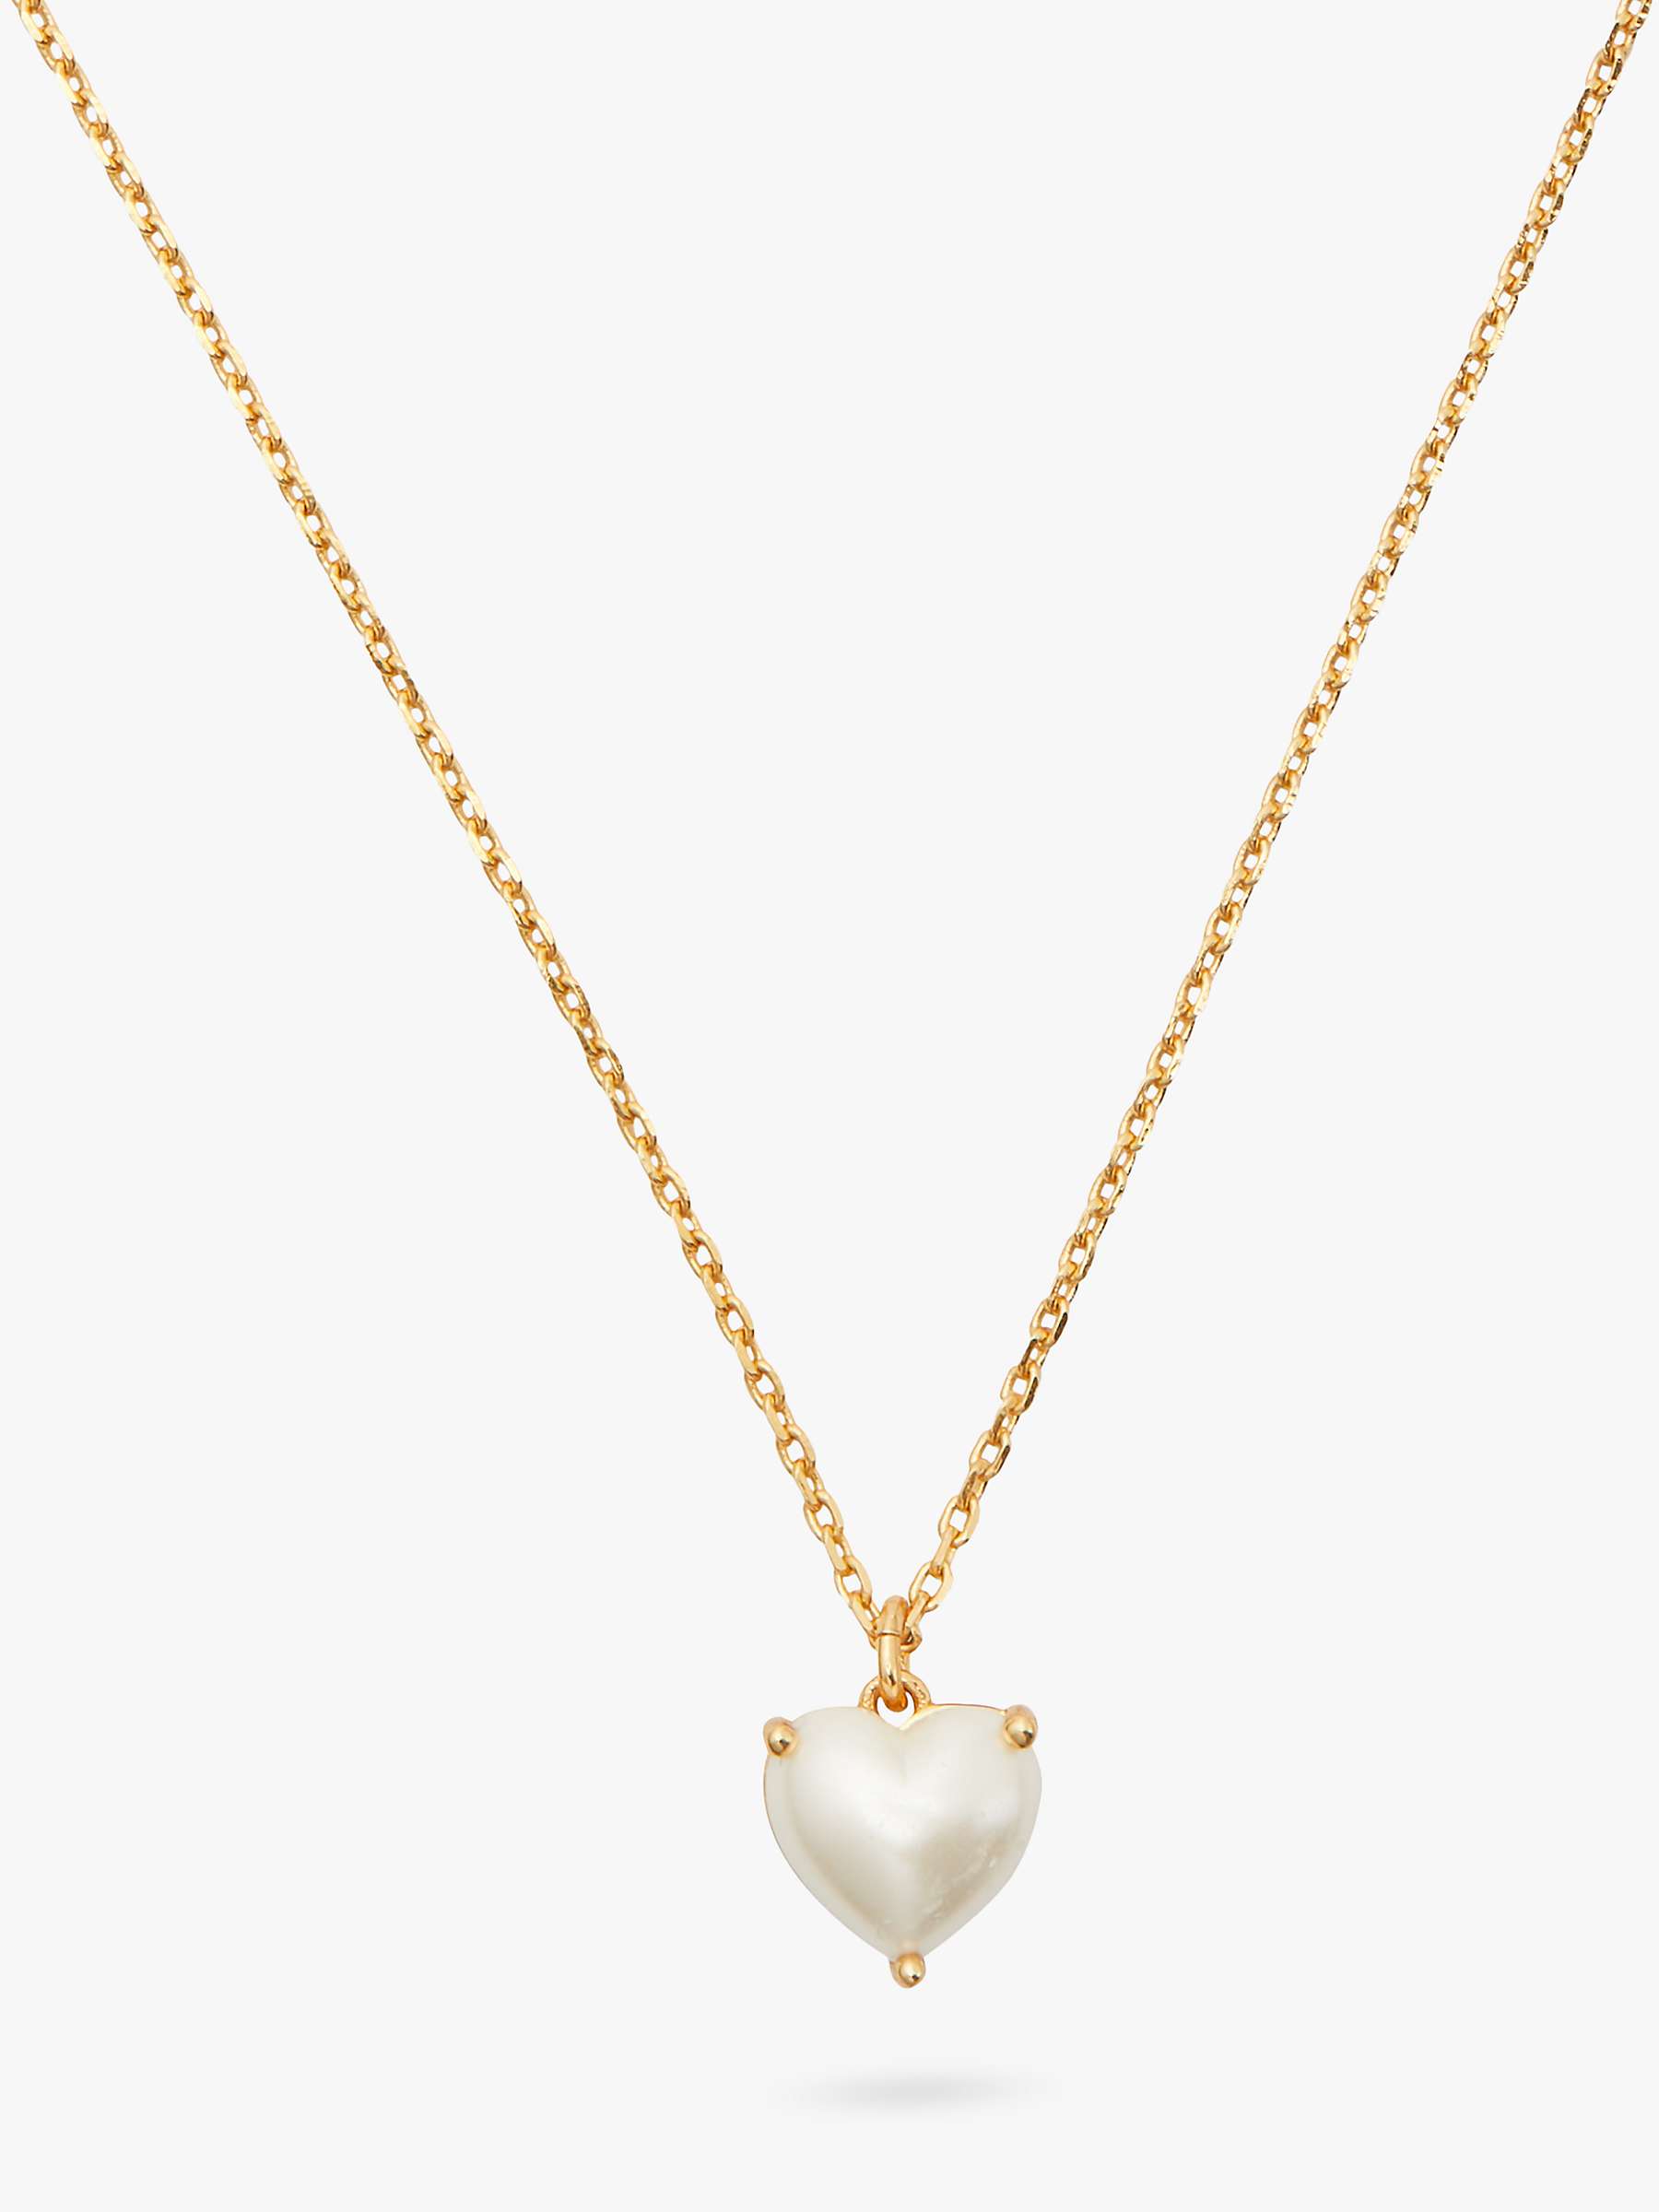 Buy kate spade new york Faux Pearl Heart Pendant Necklace, Gold/Cream Online at johnlewis.com